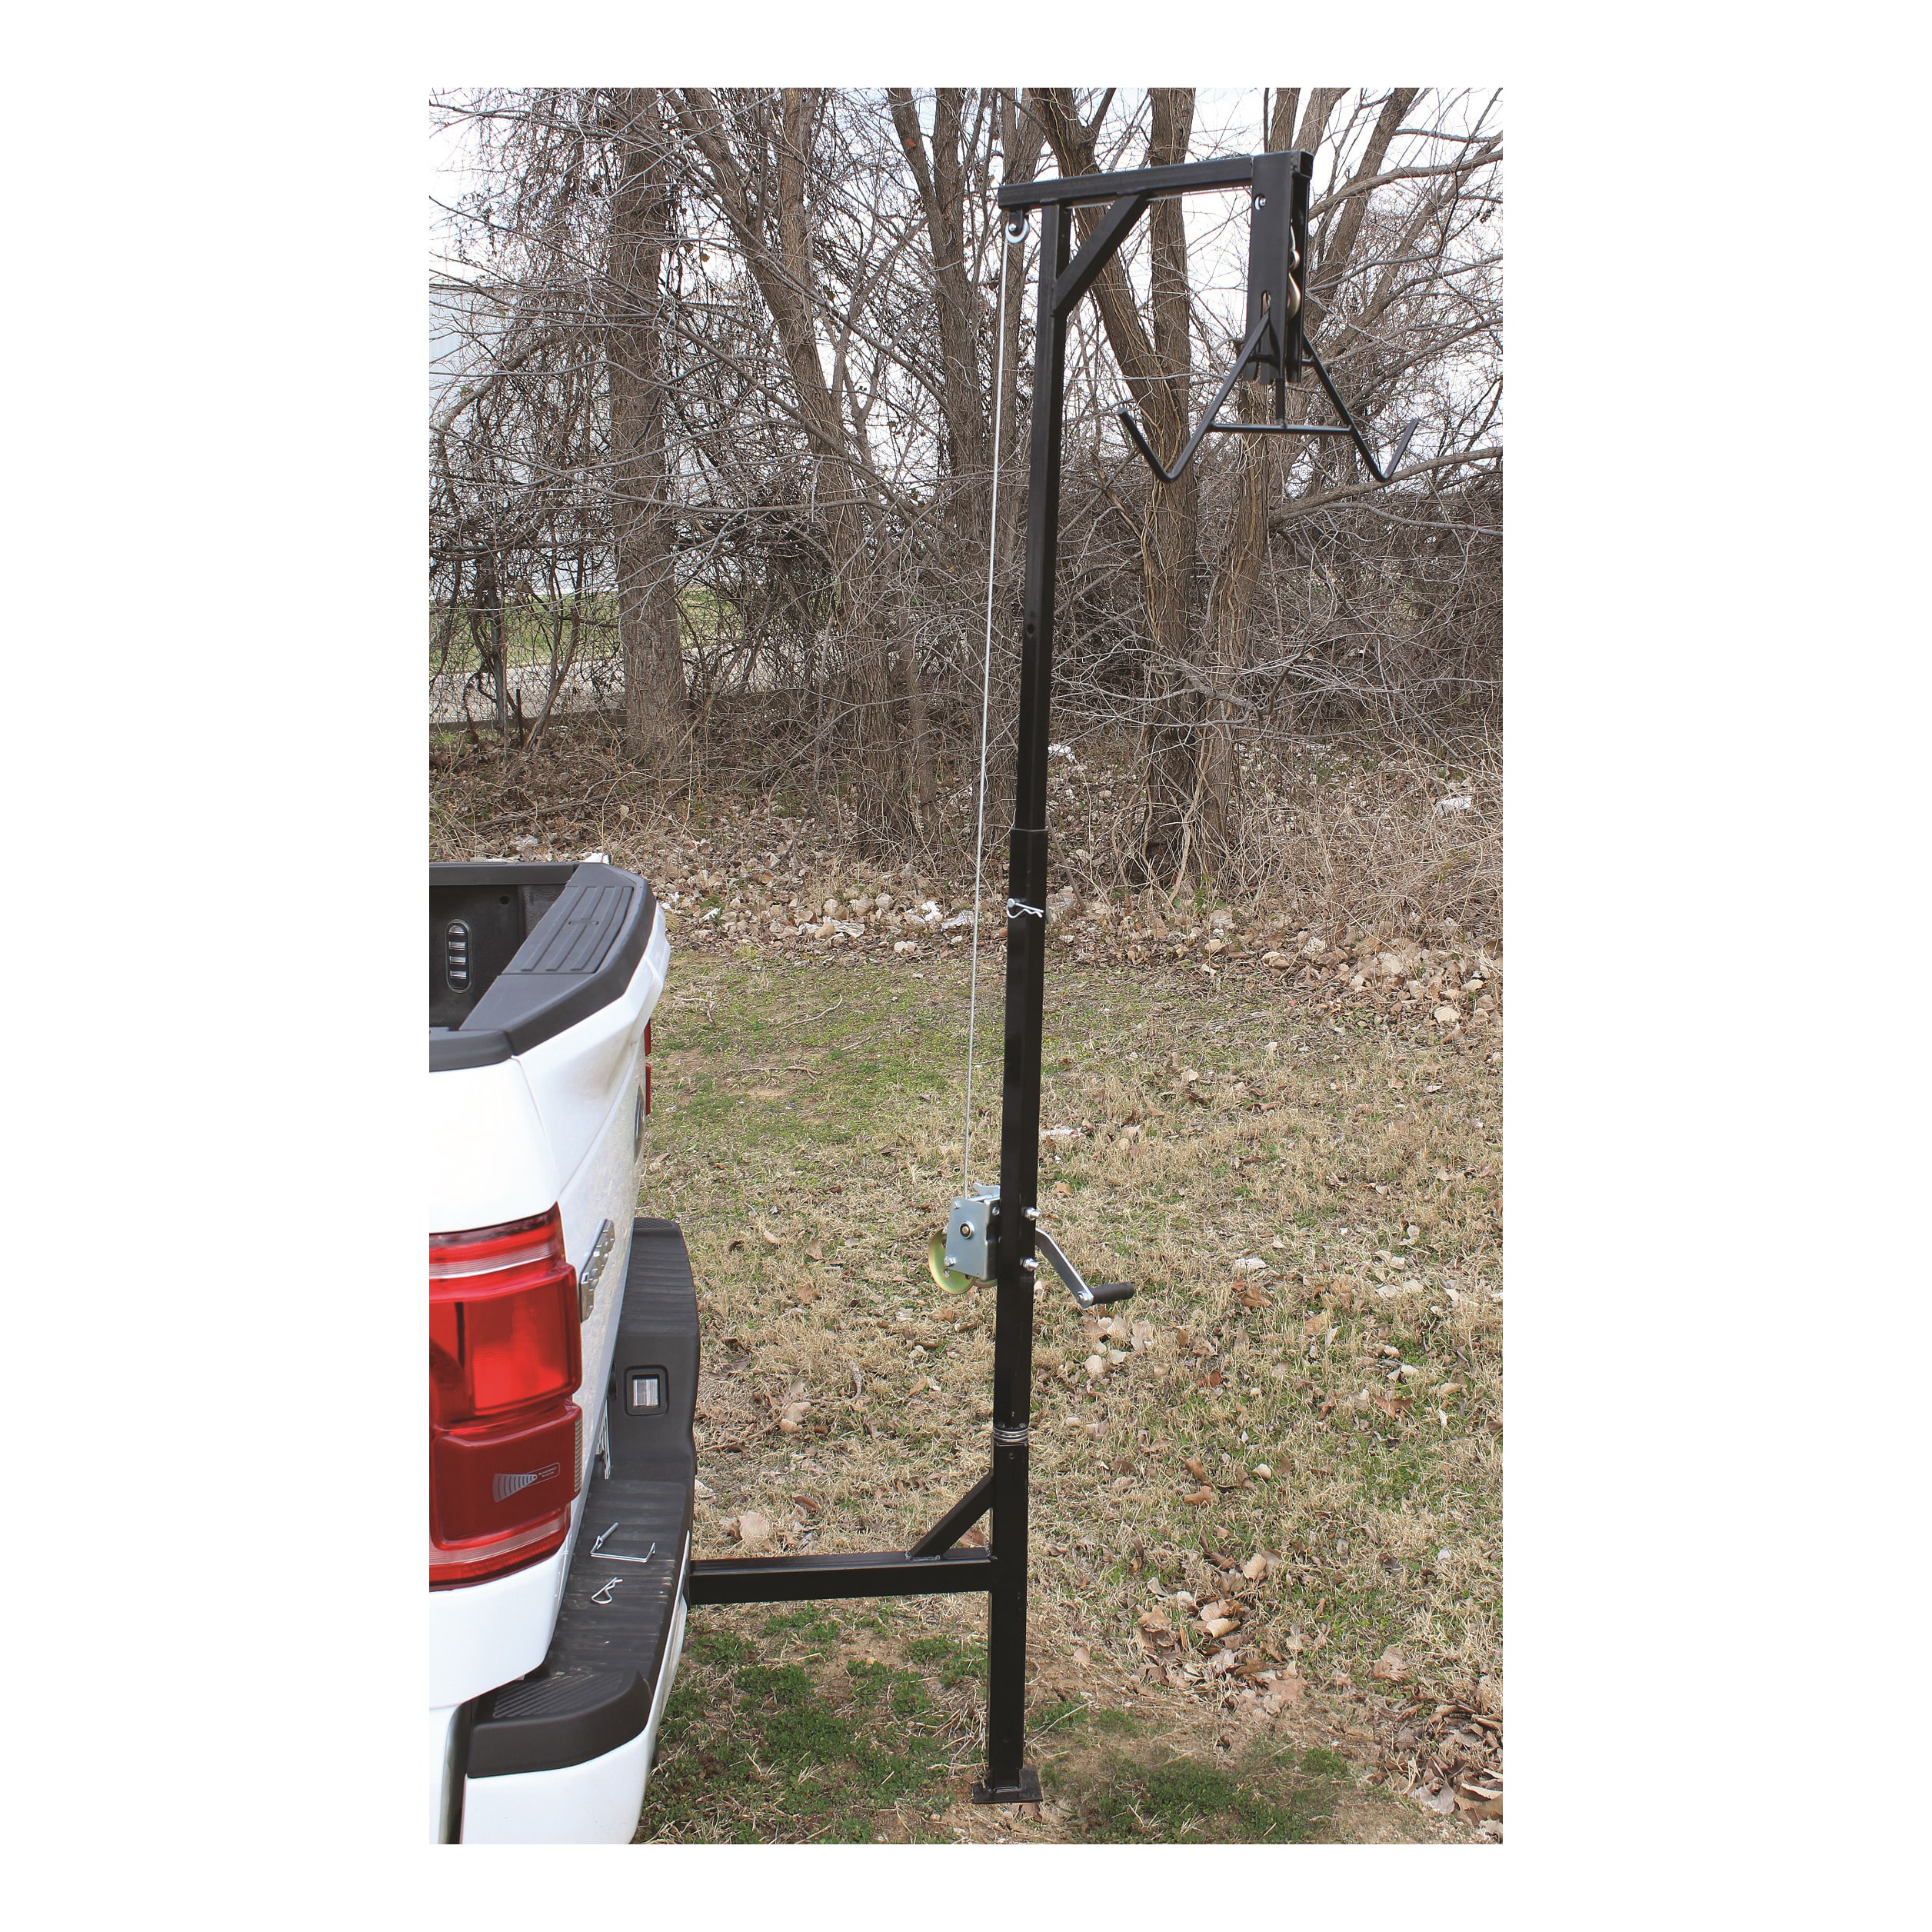 HME™ Truck Hitch Game Hoist - In the Field